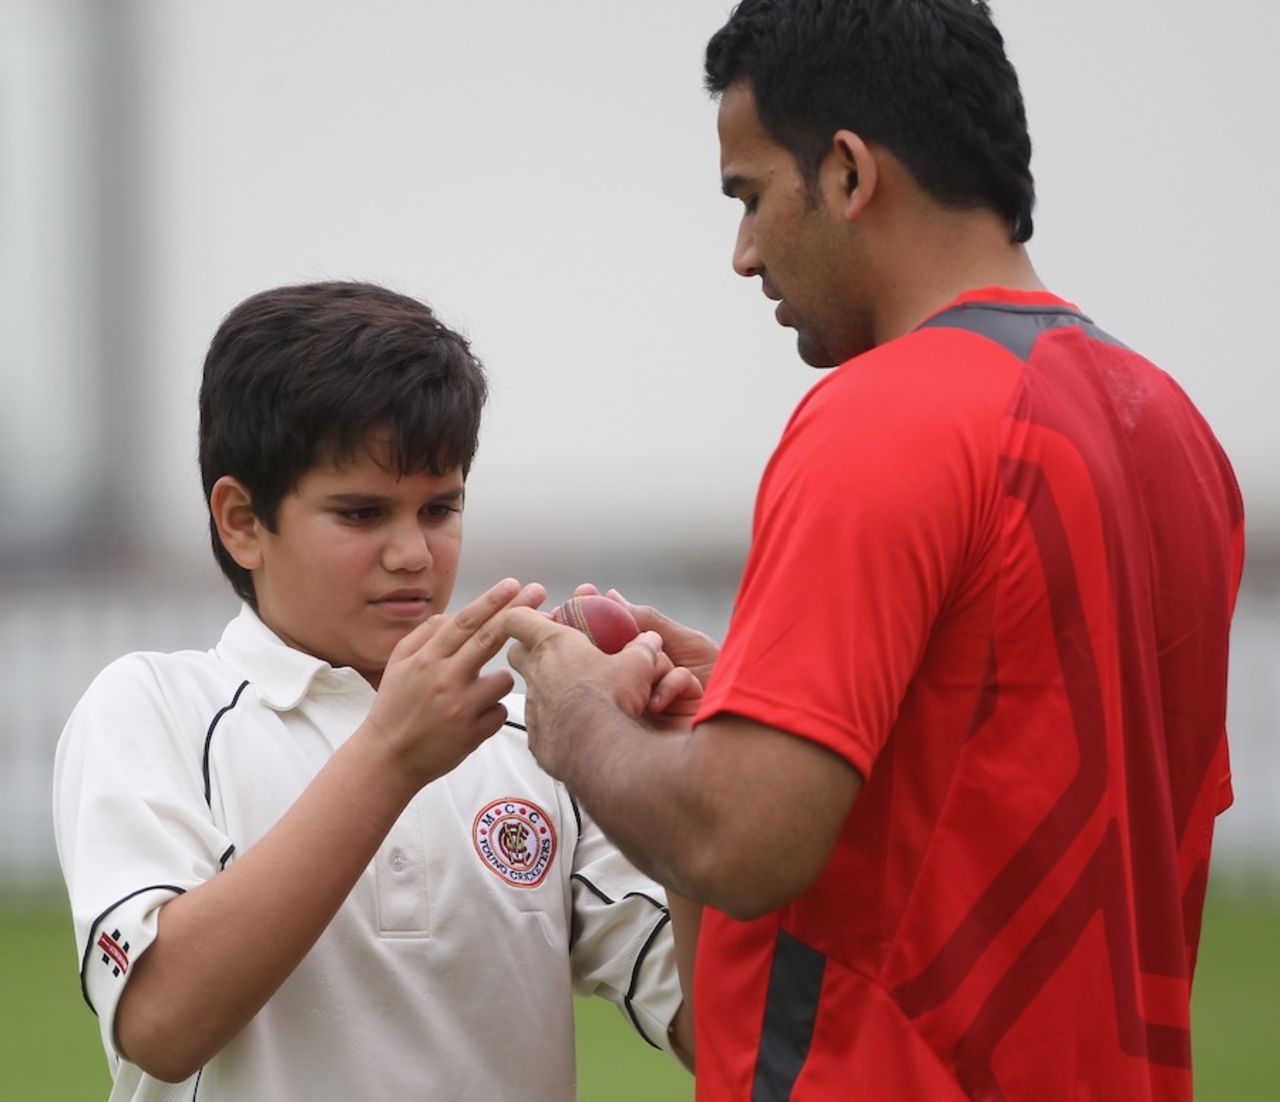 Zaheer Khan chats with Sachin Tendulkar's son Arjun during a practice session, Lord's, July 20, 2011